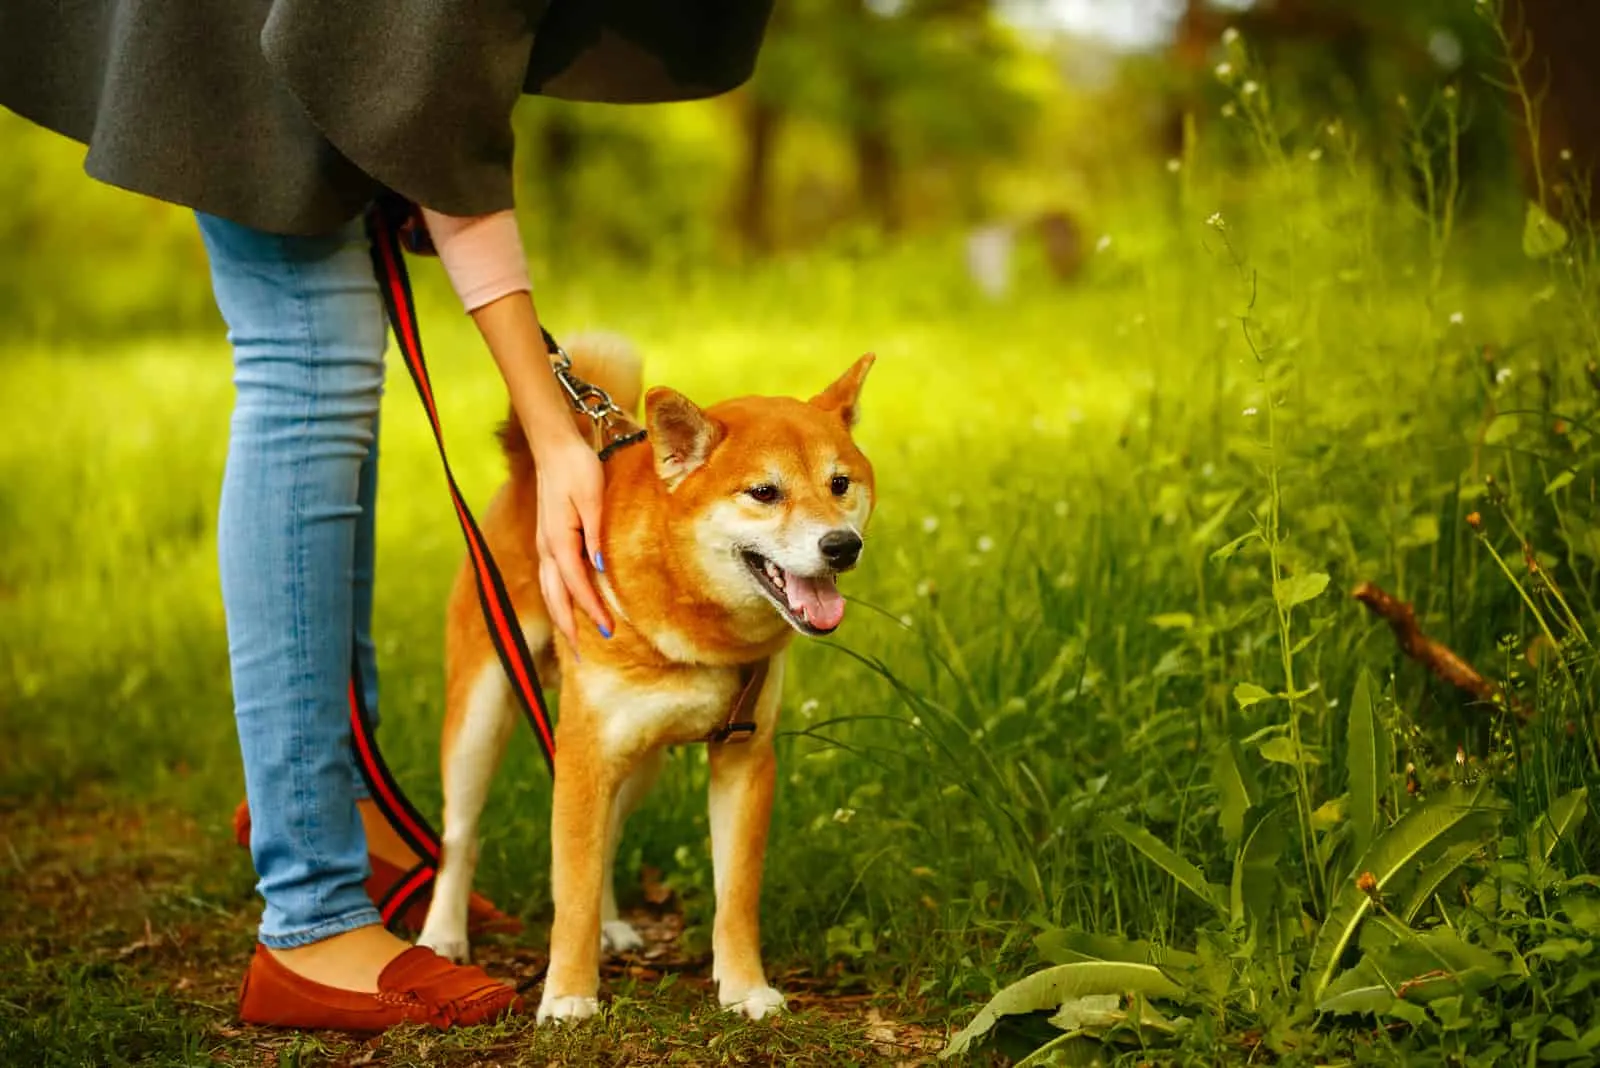 Shiba Inu stands next to the owner in the spring park